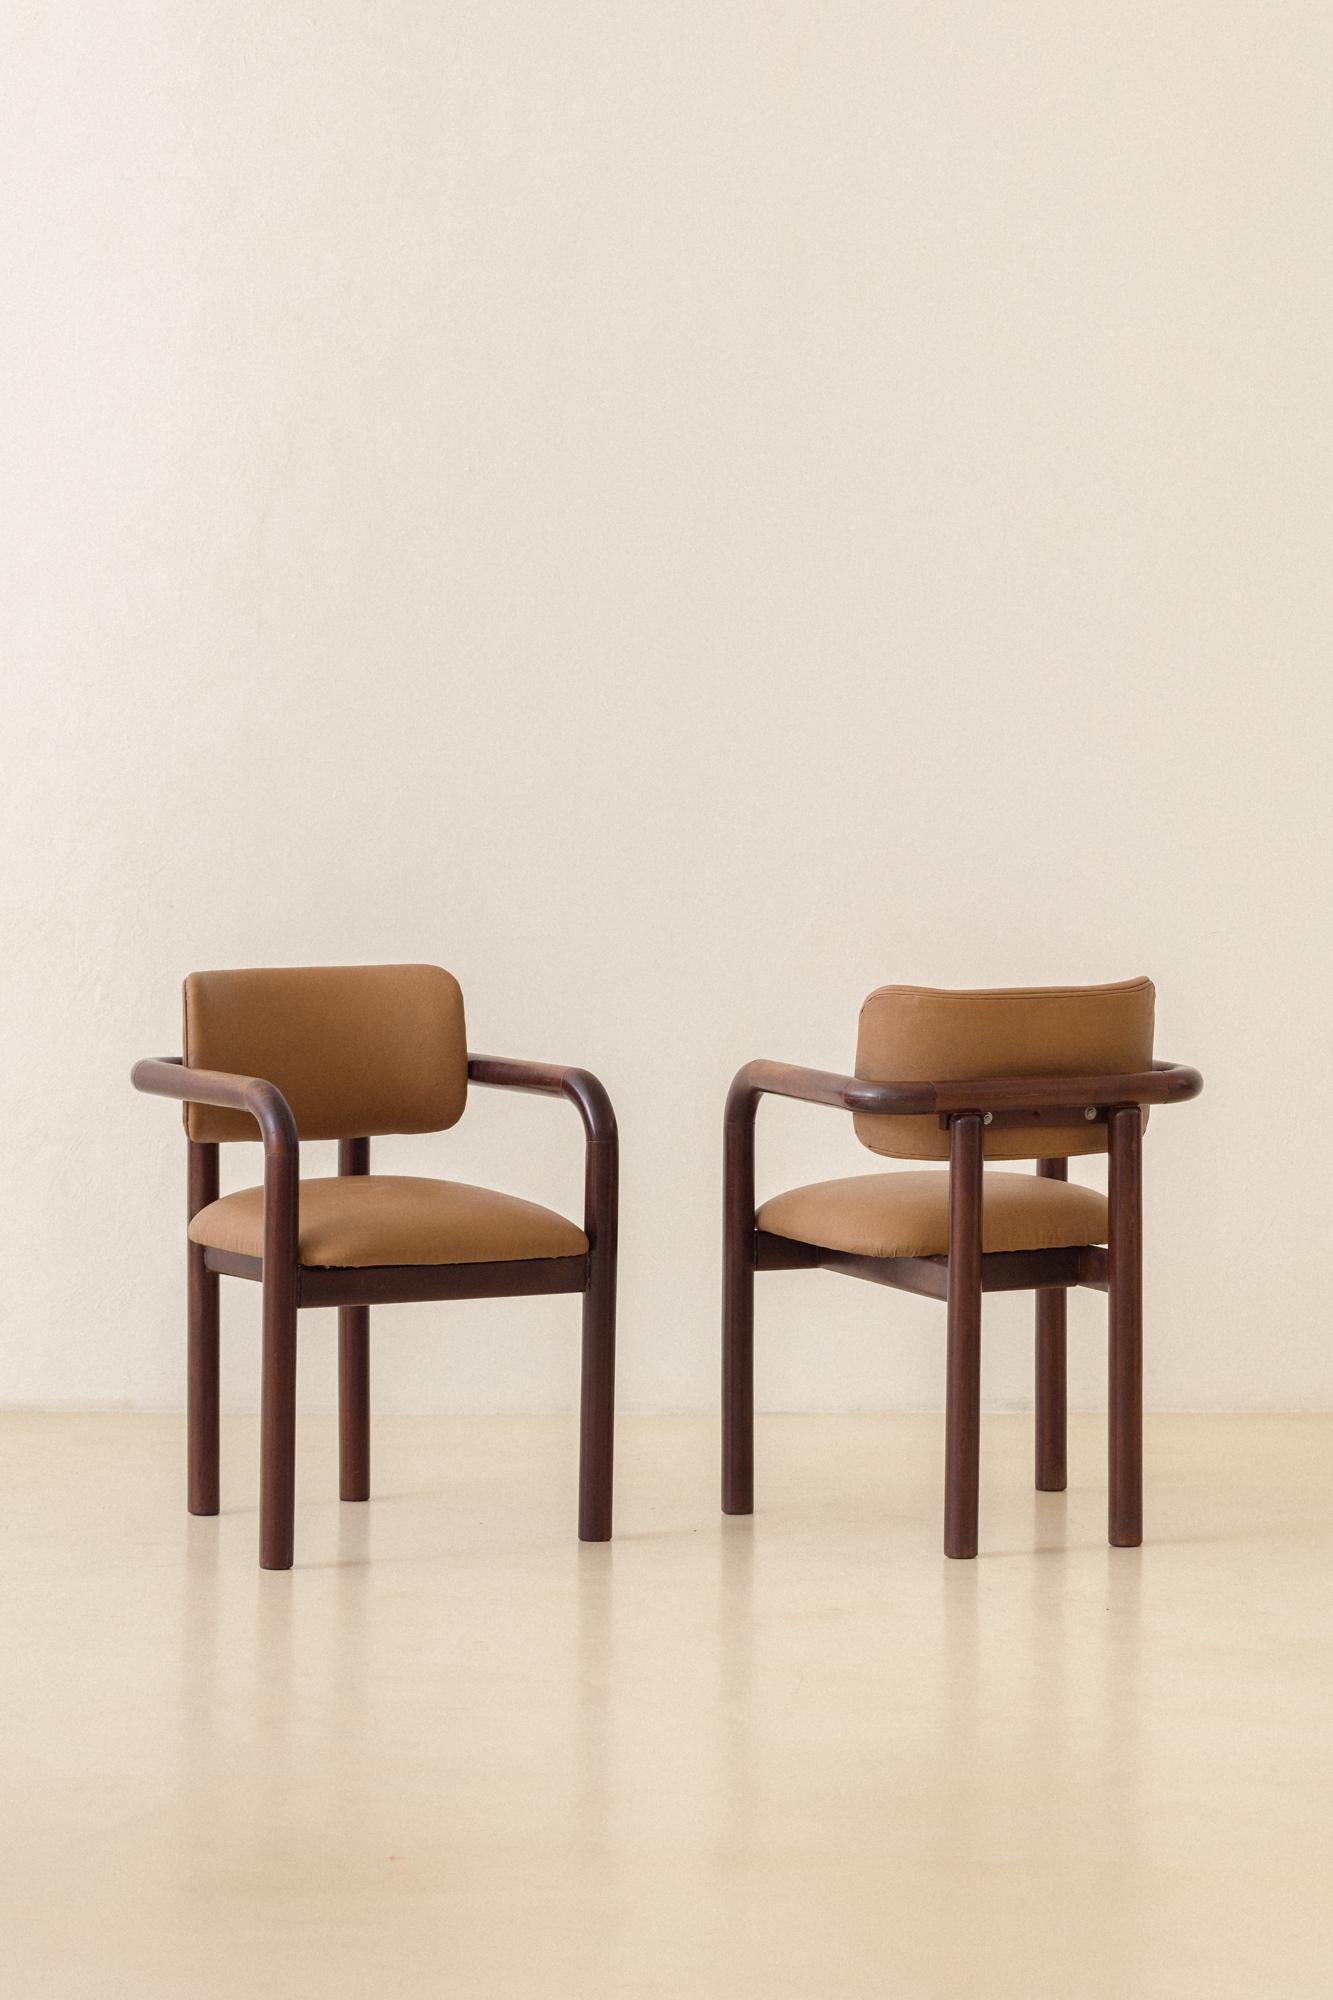 Brazilian Midcentury Design, Solid Imbuia Dining Chairs with Armrests, 1950s For Sale 1